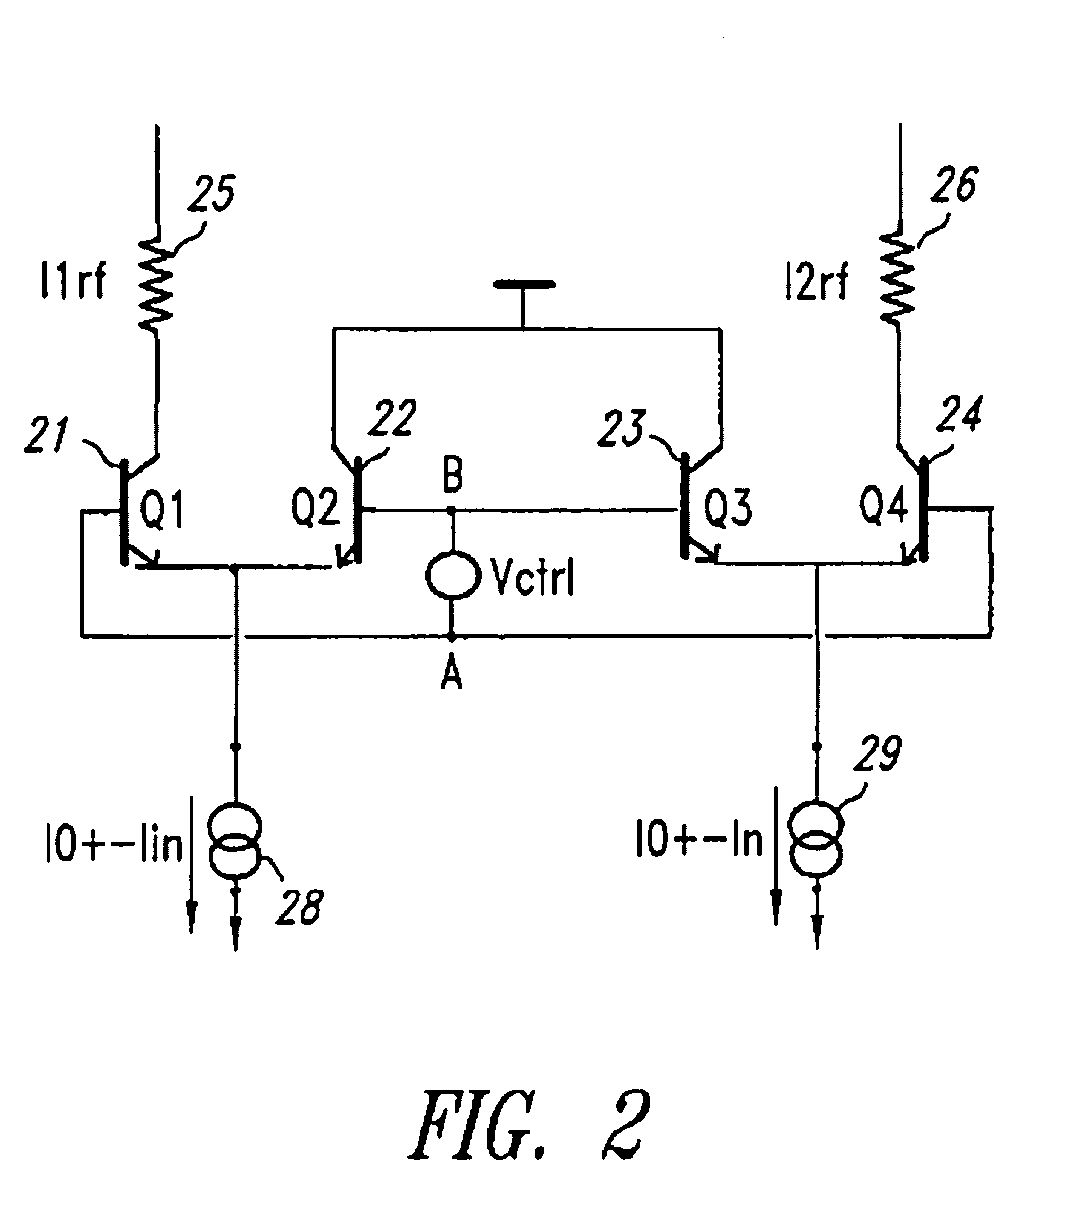 Attenuation cell with an attenuation factor control device